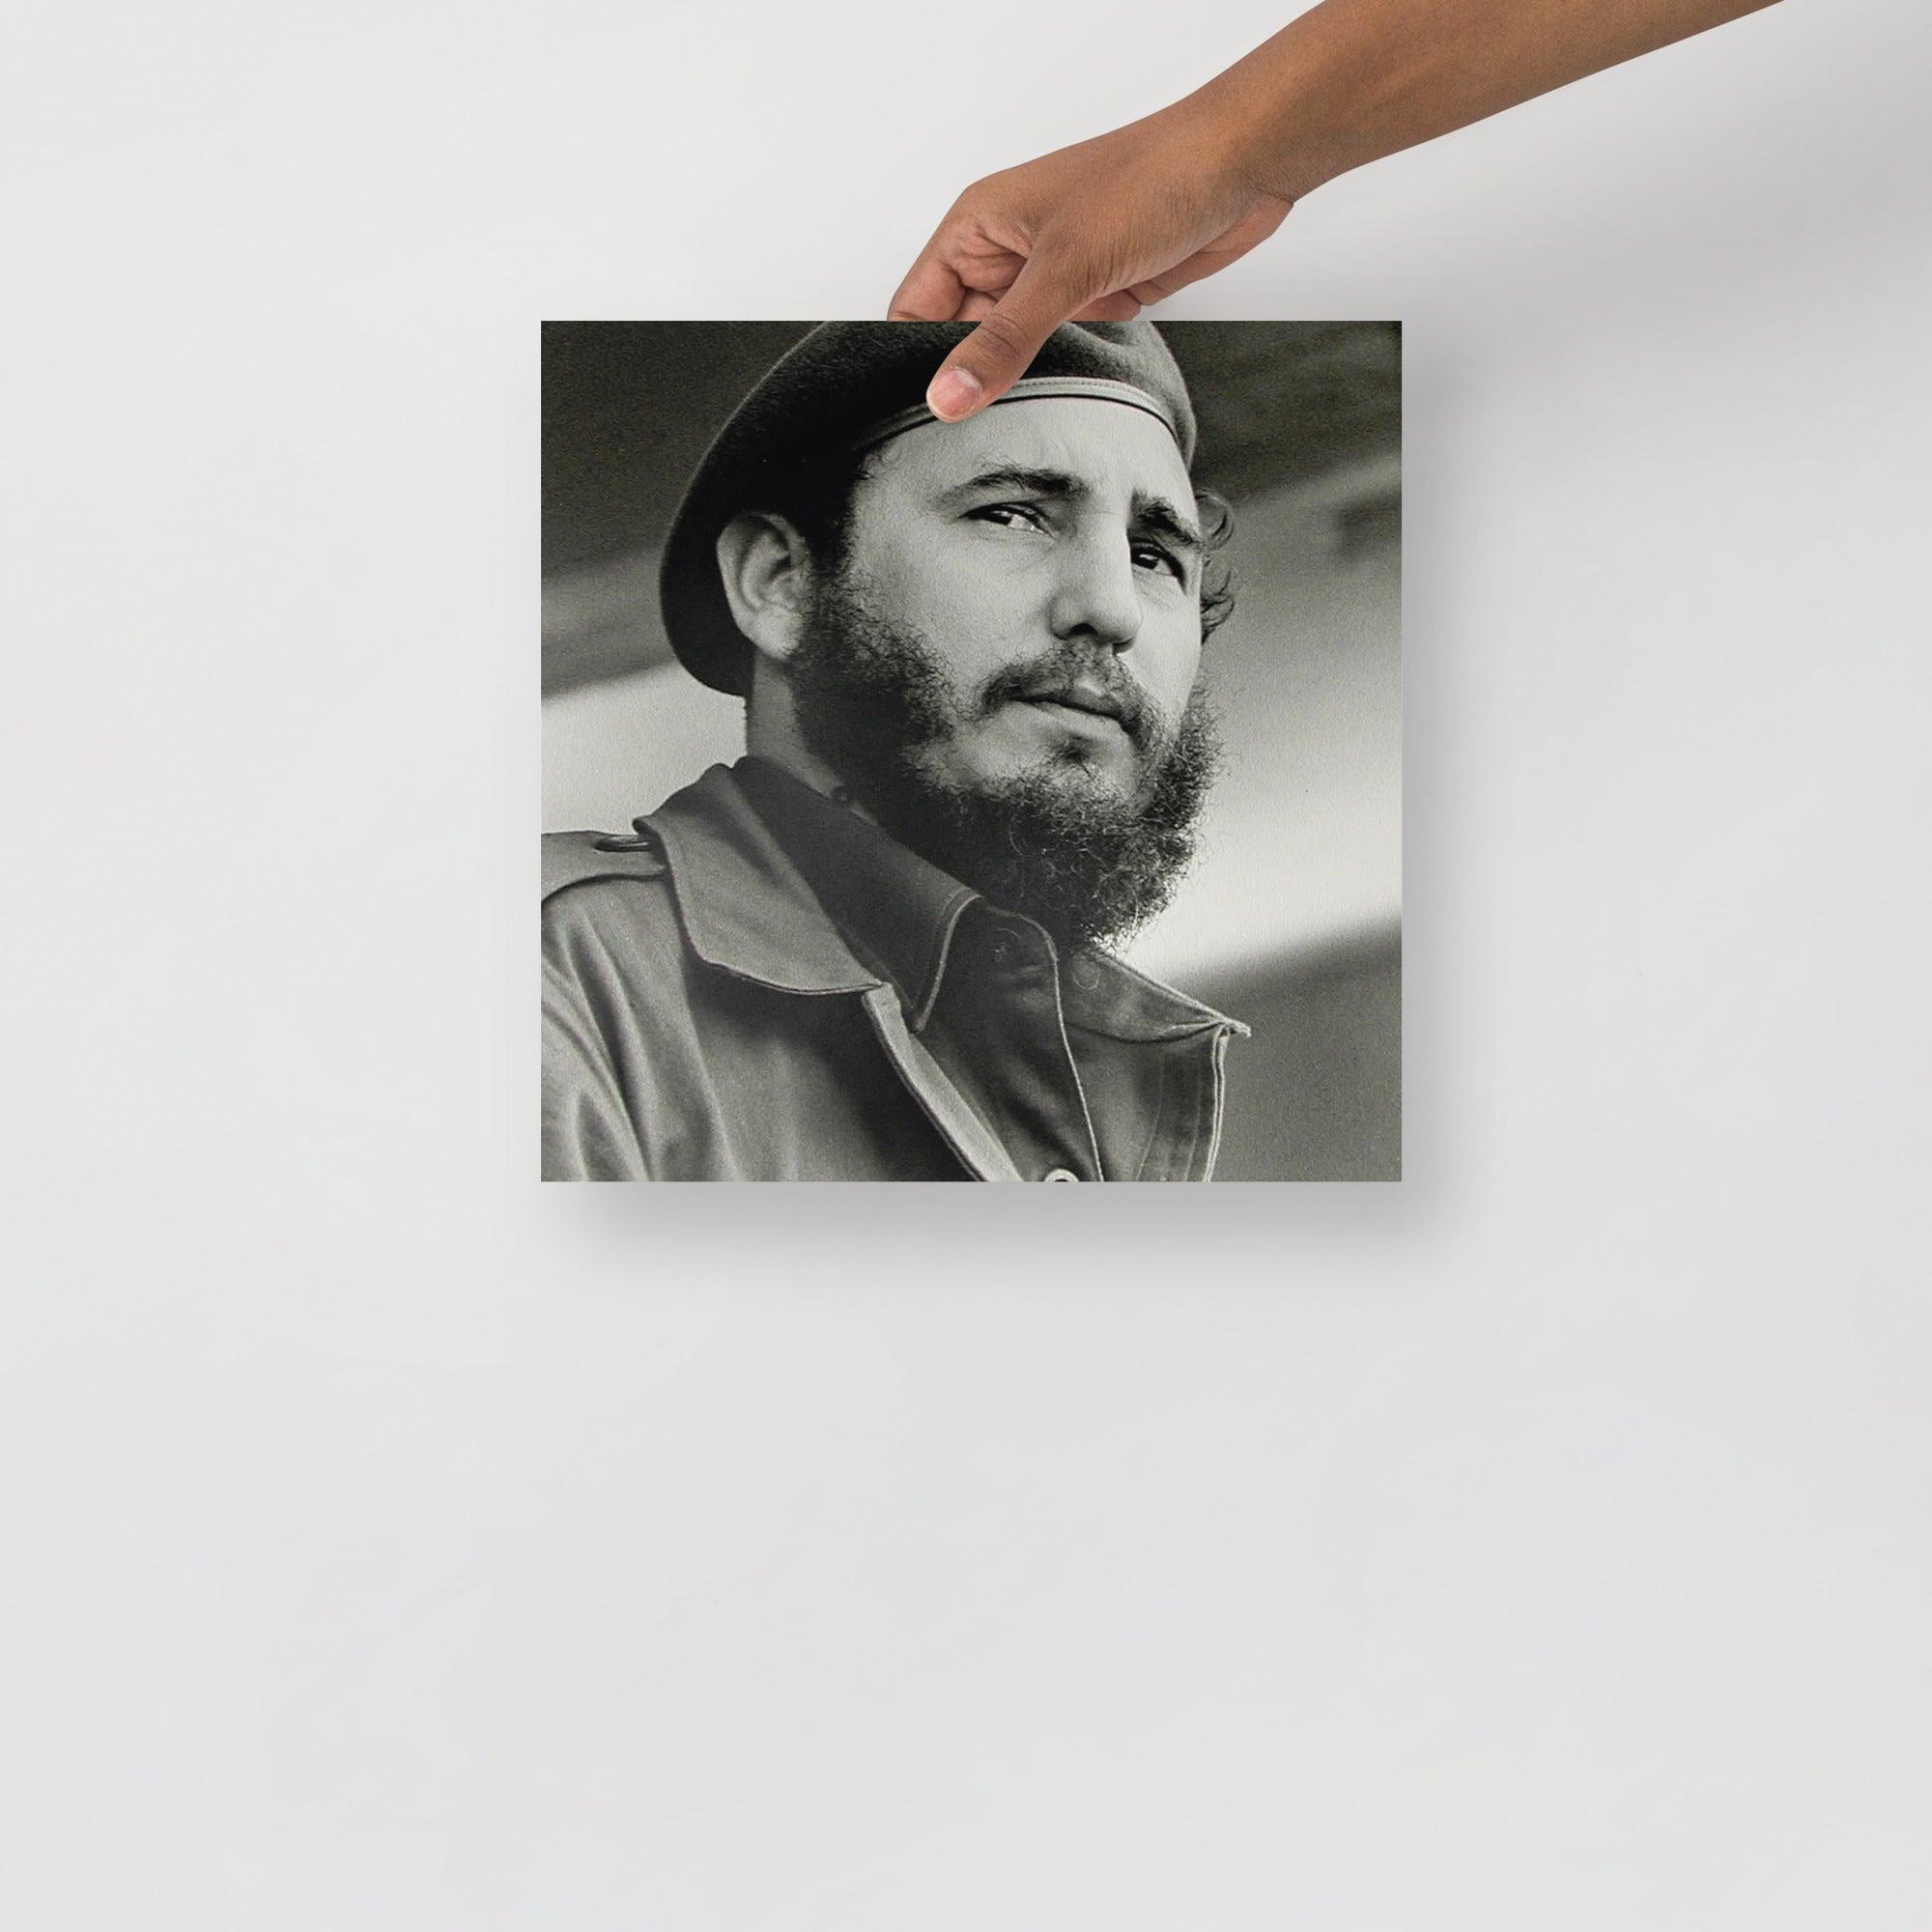 A Fidel Castro poster on a plain backdrop in size 12x12”.